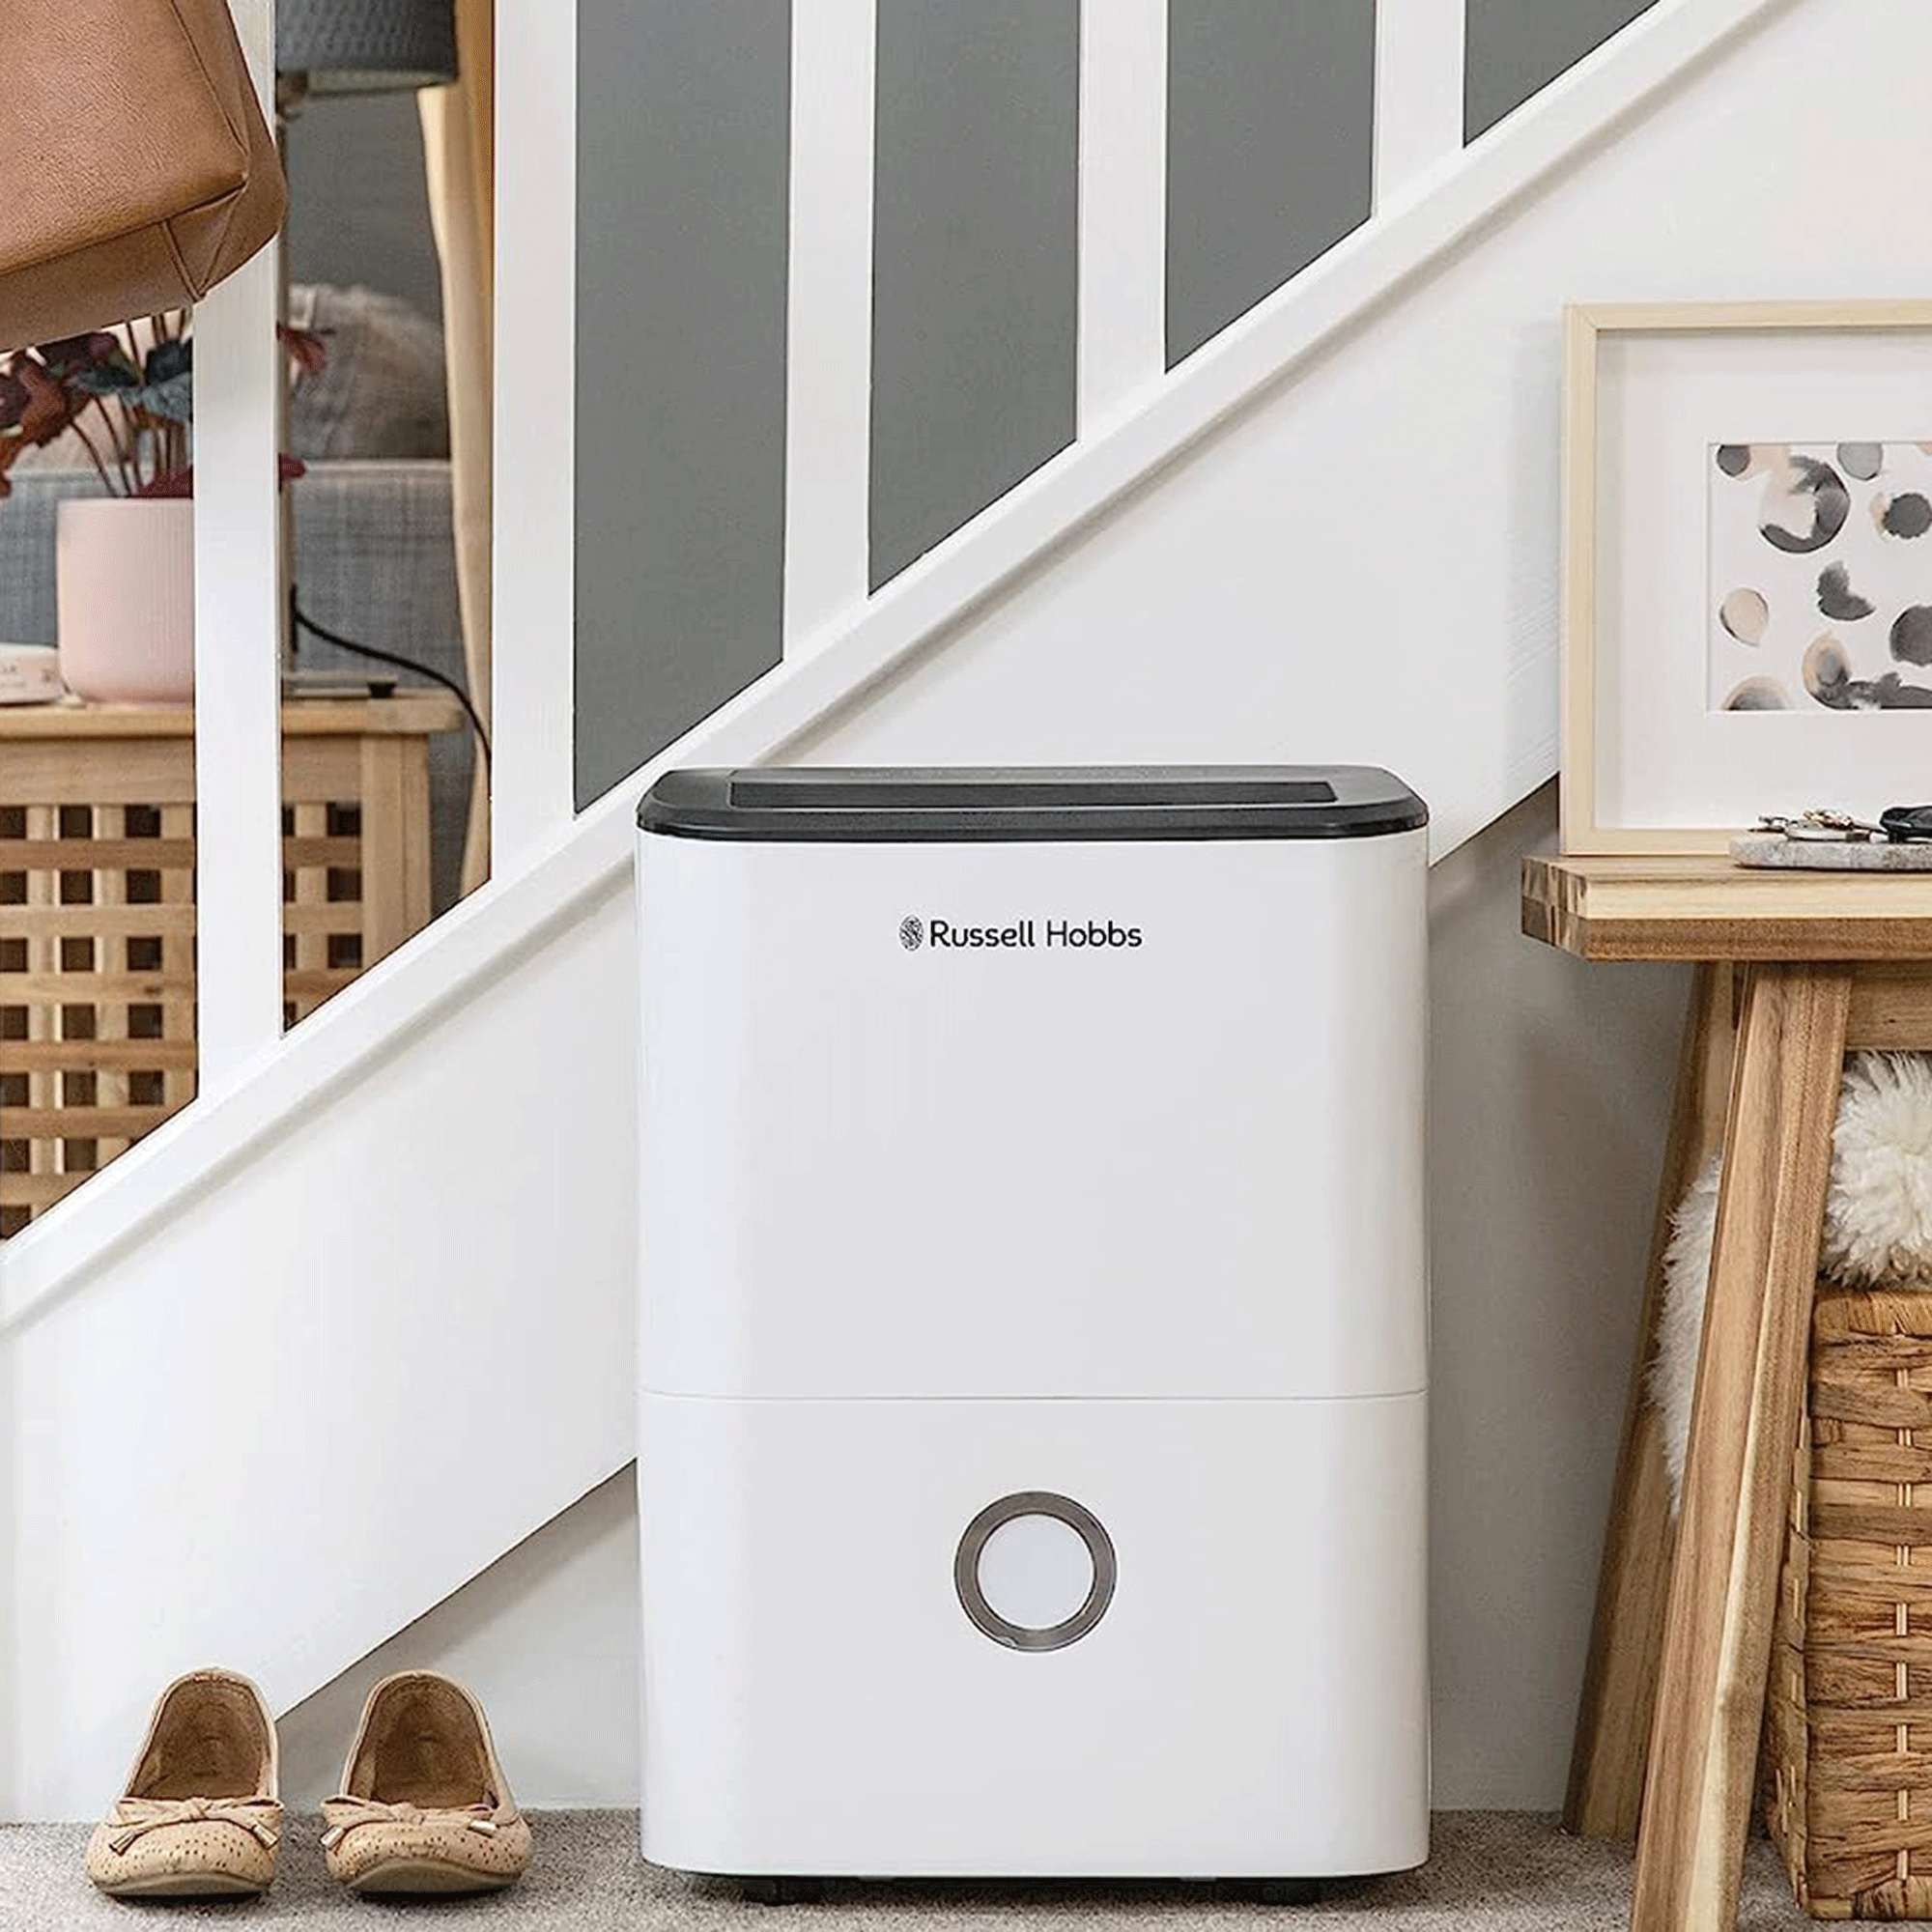 The Russell Hobbs 20 litre dehumidifier in hallway of an open plan living area